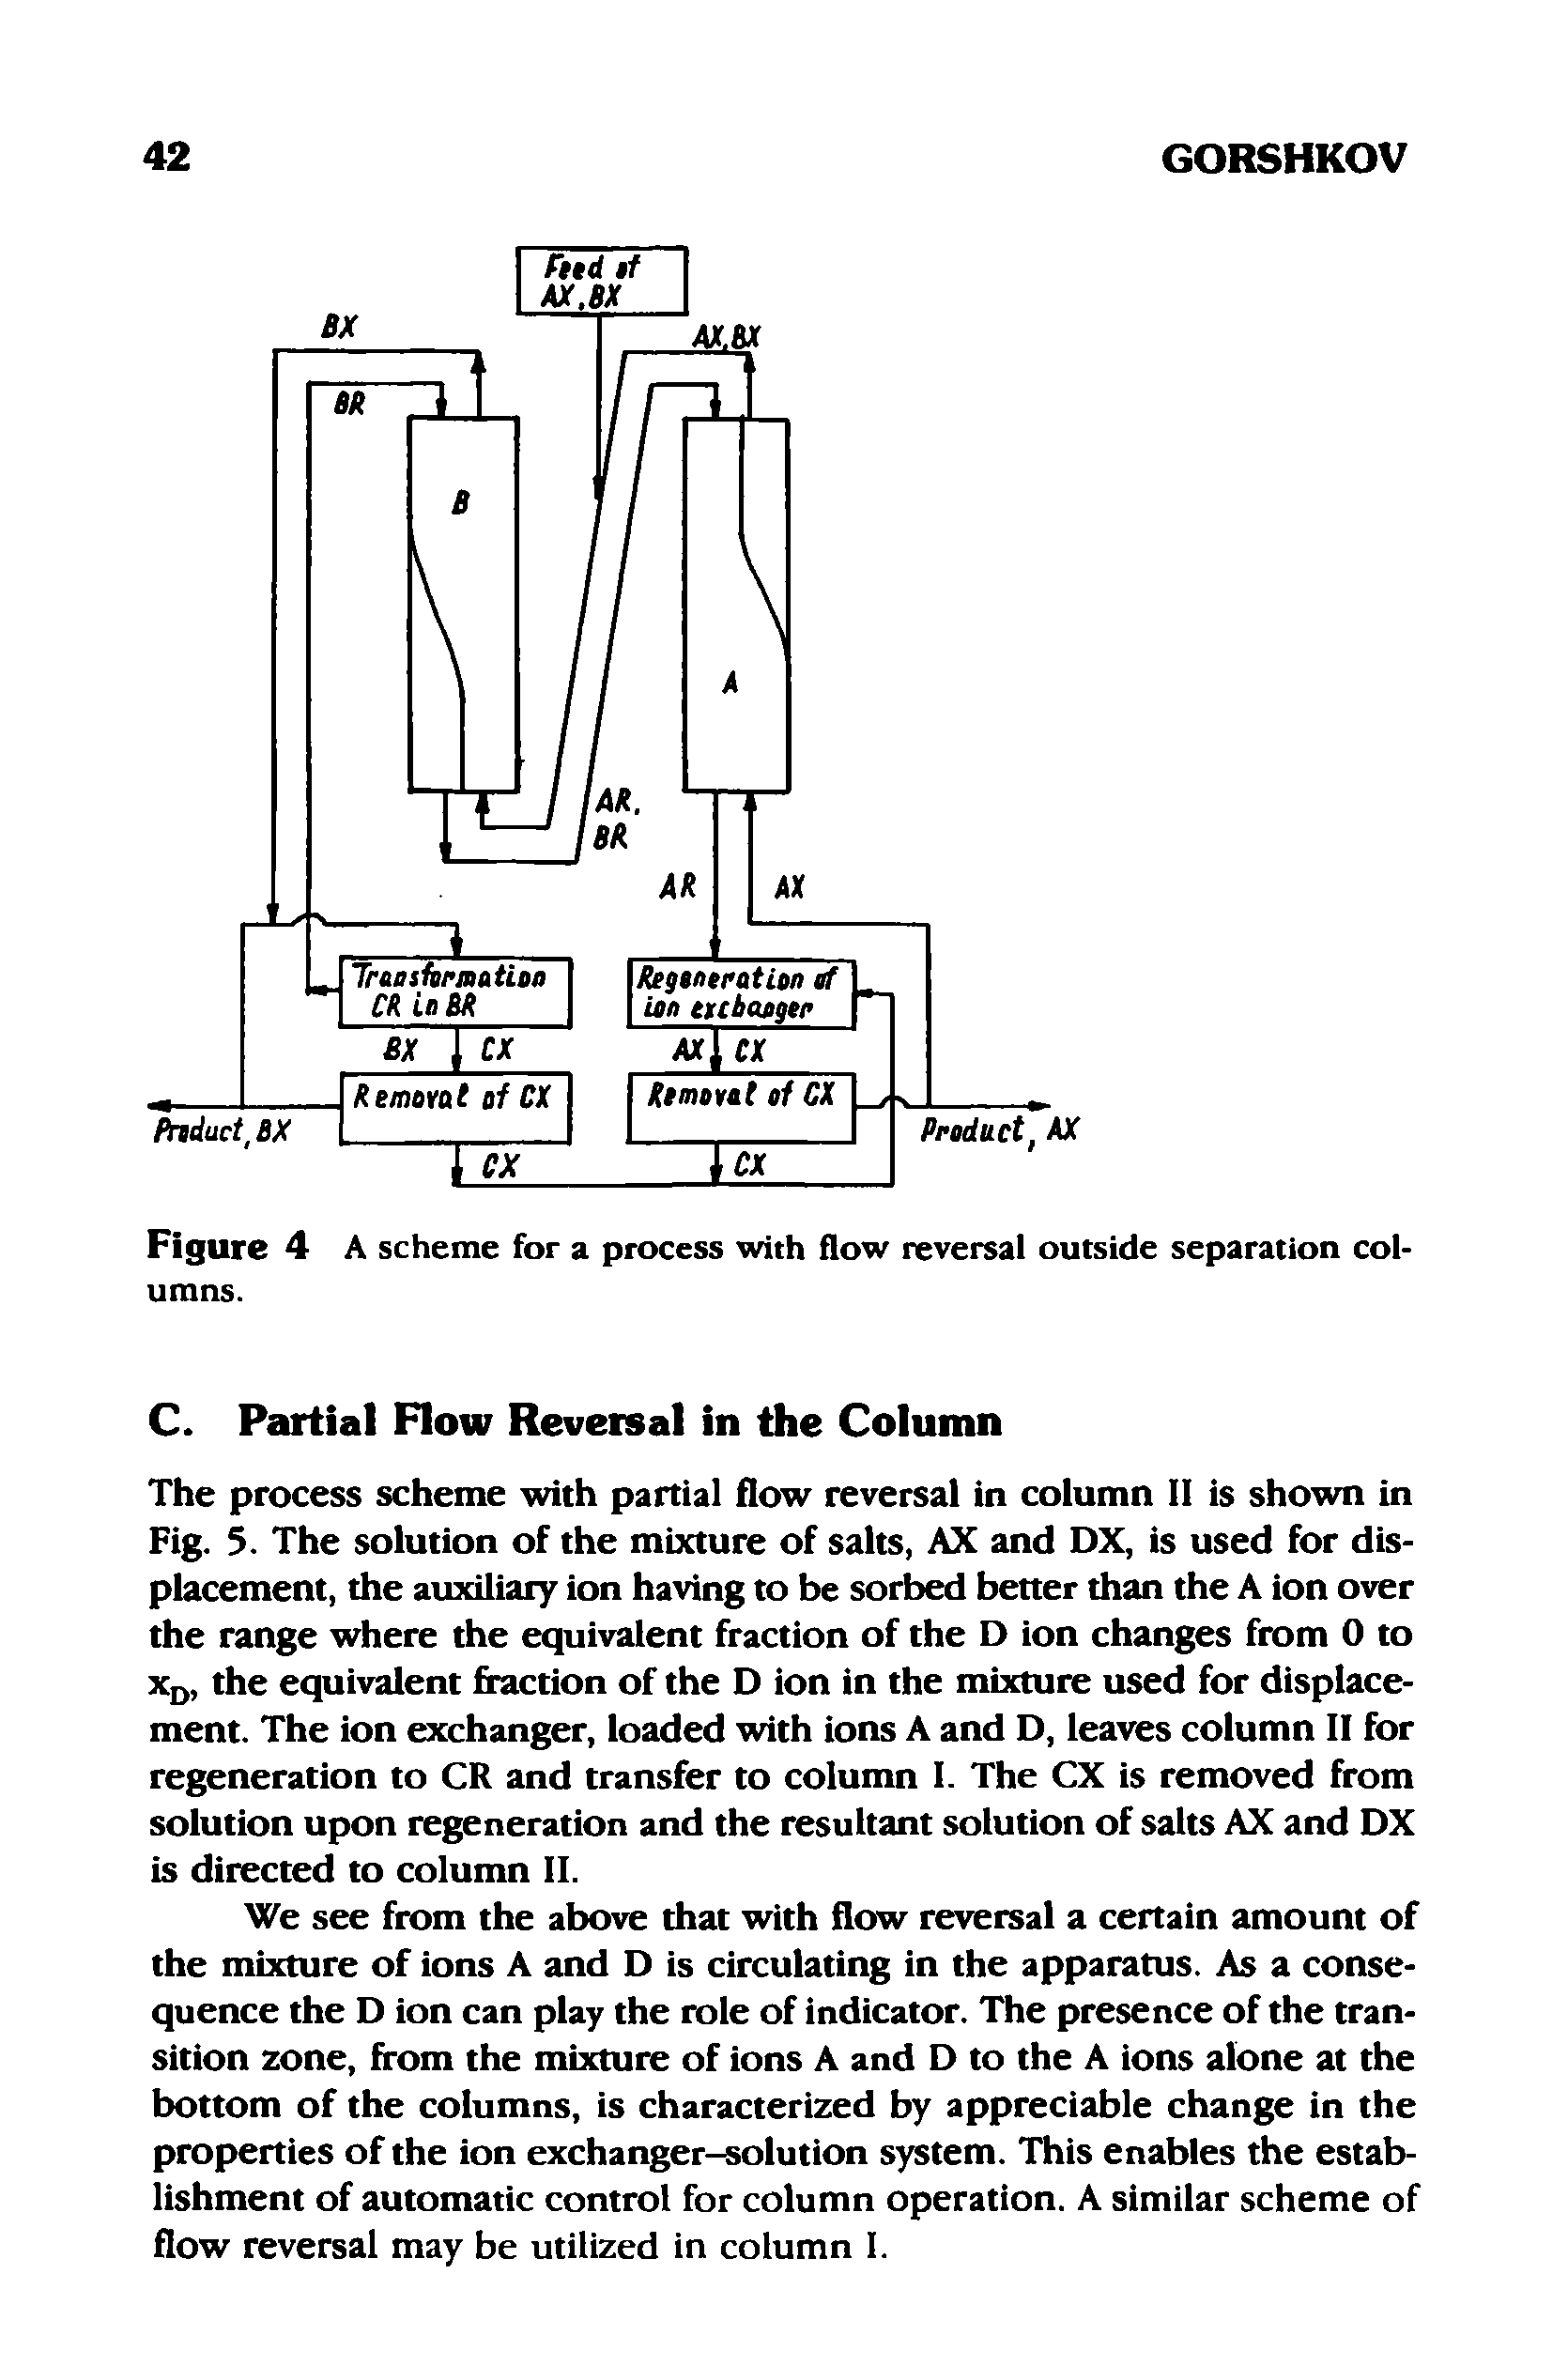 Figure 4 A scheme for a process with flow reversal outside separation columns.